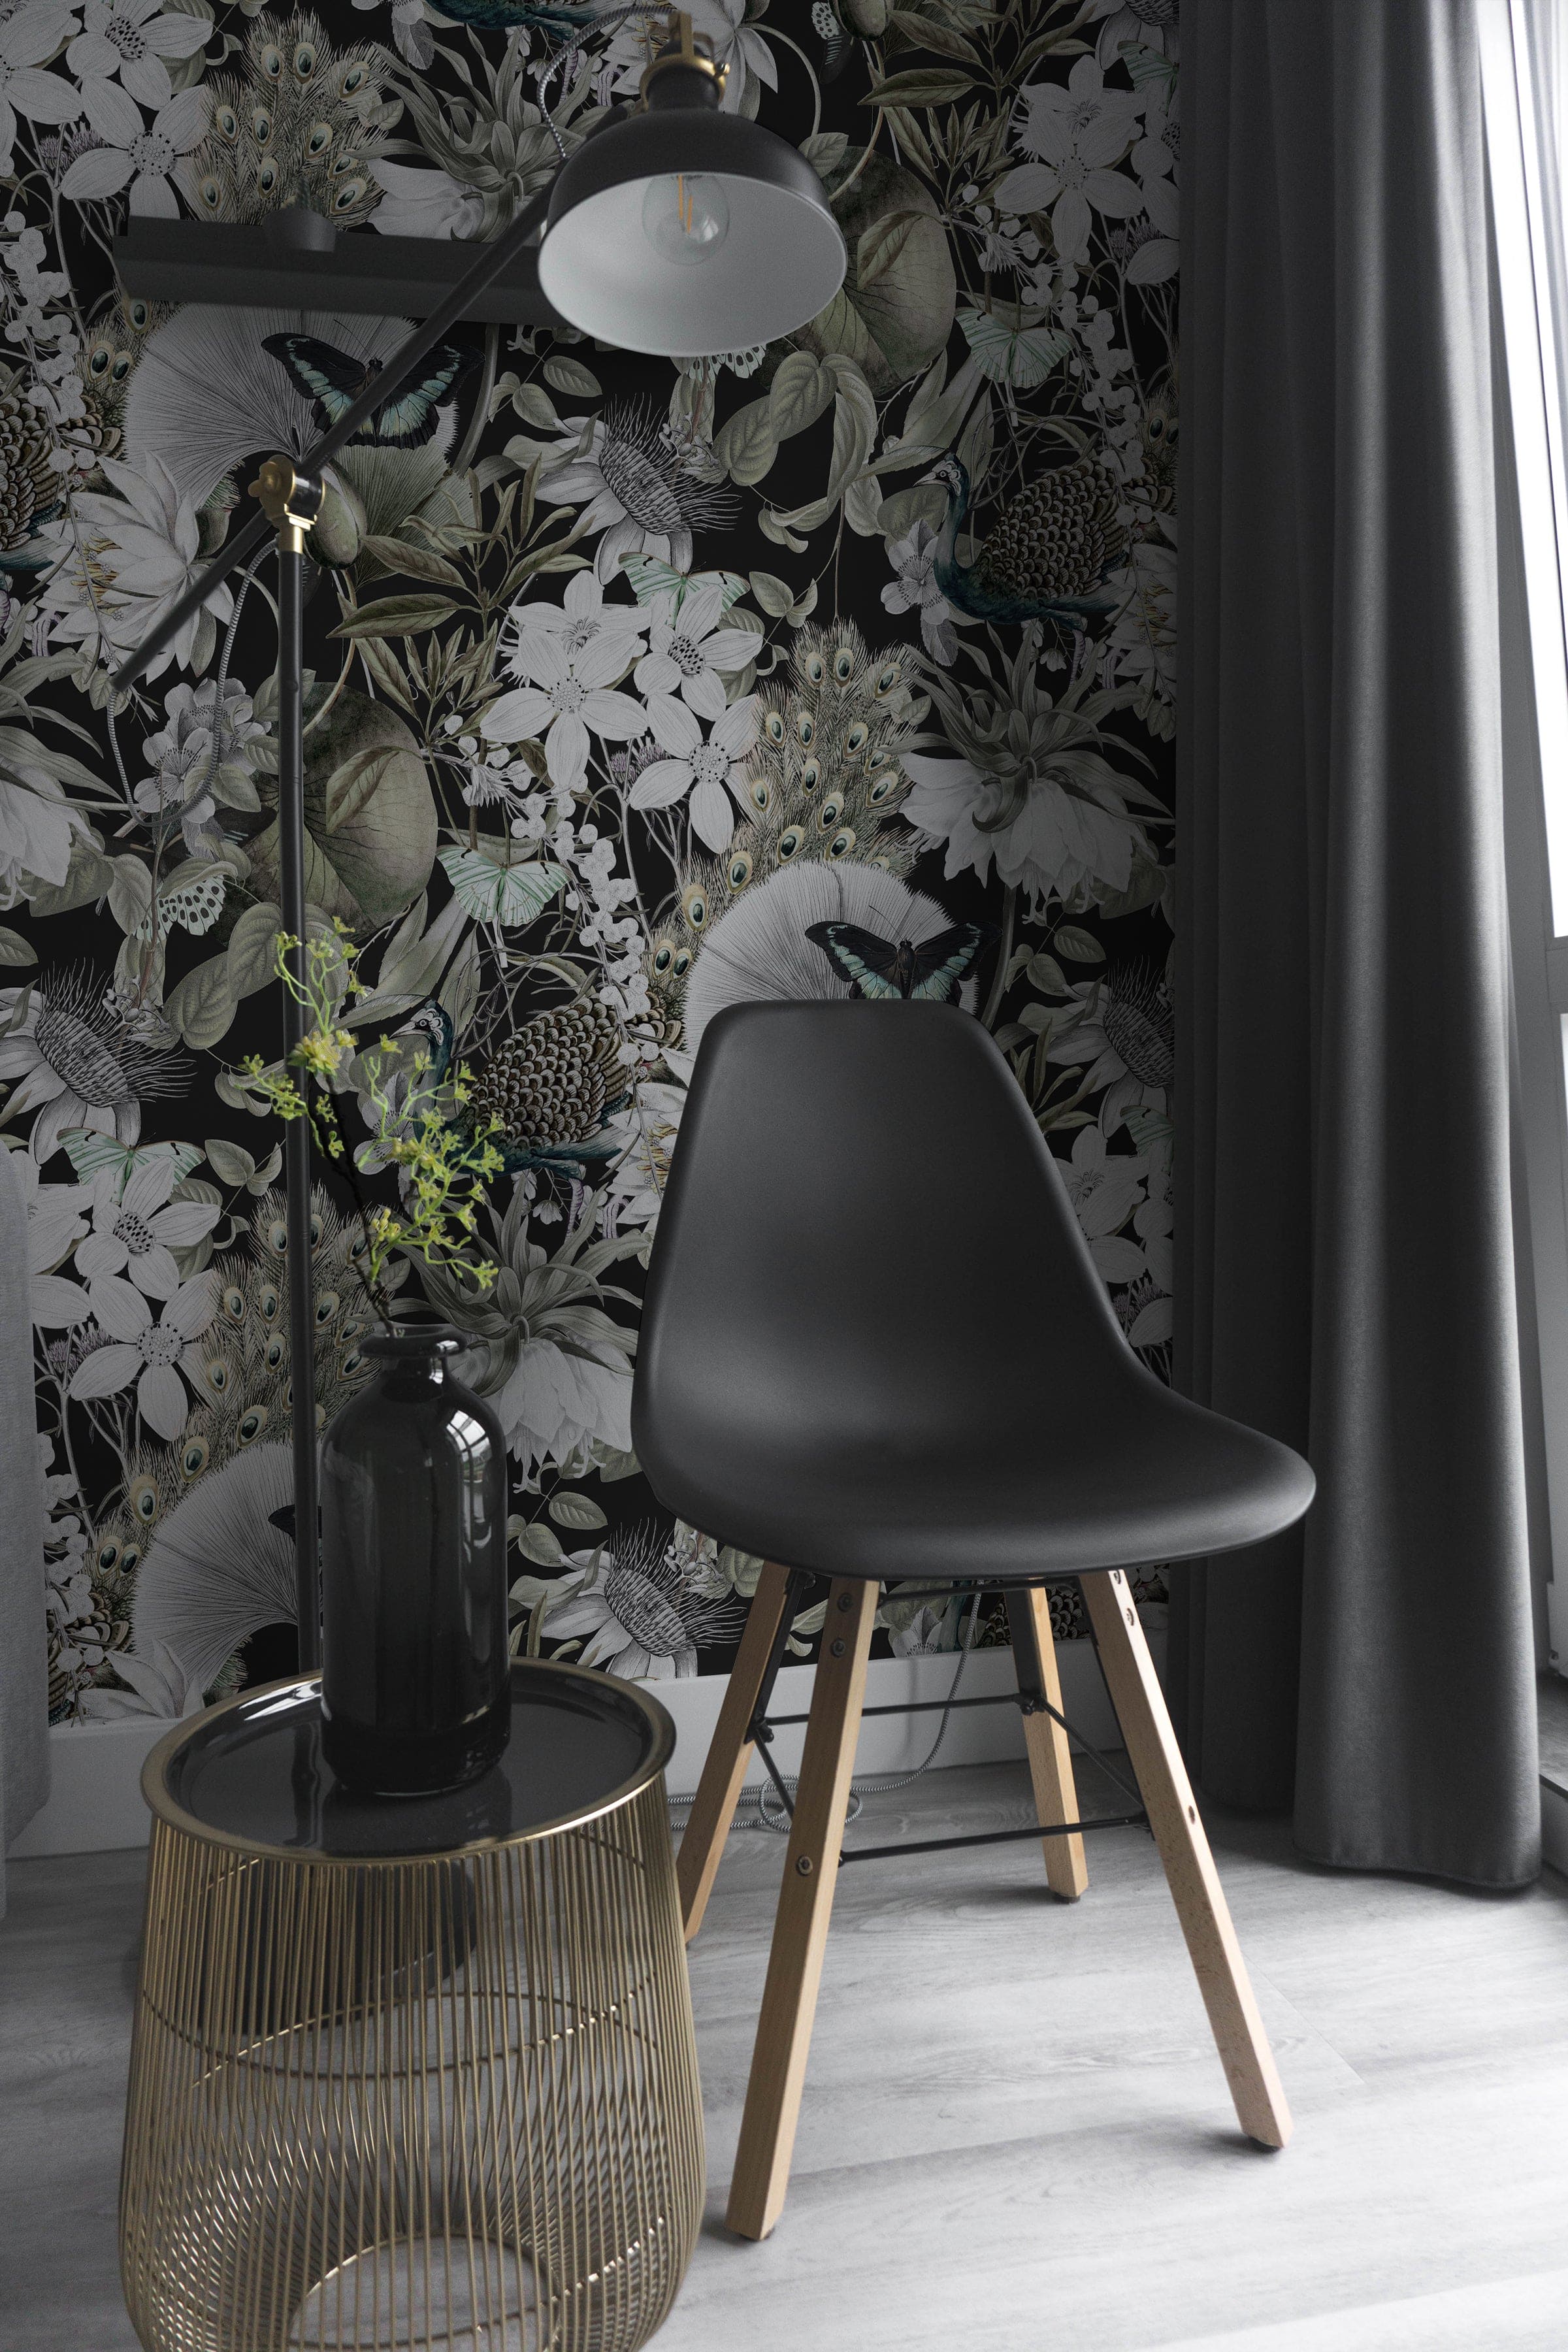 Bold and Dramatic: Making a Statement with Dark Wallpaper